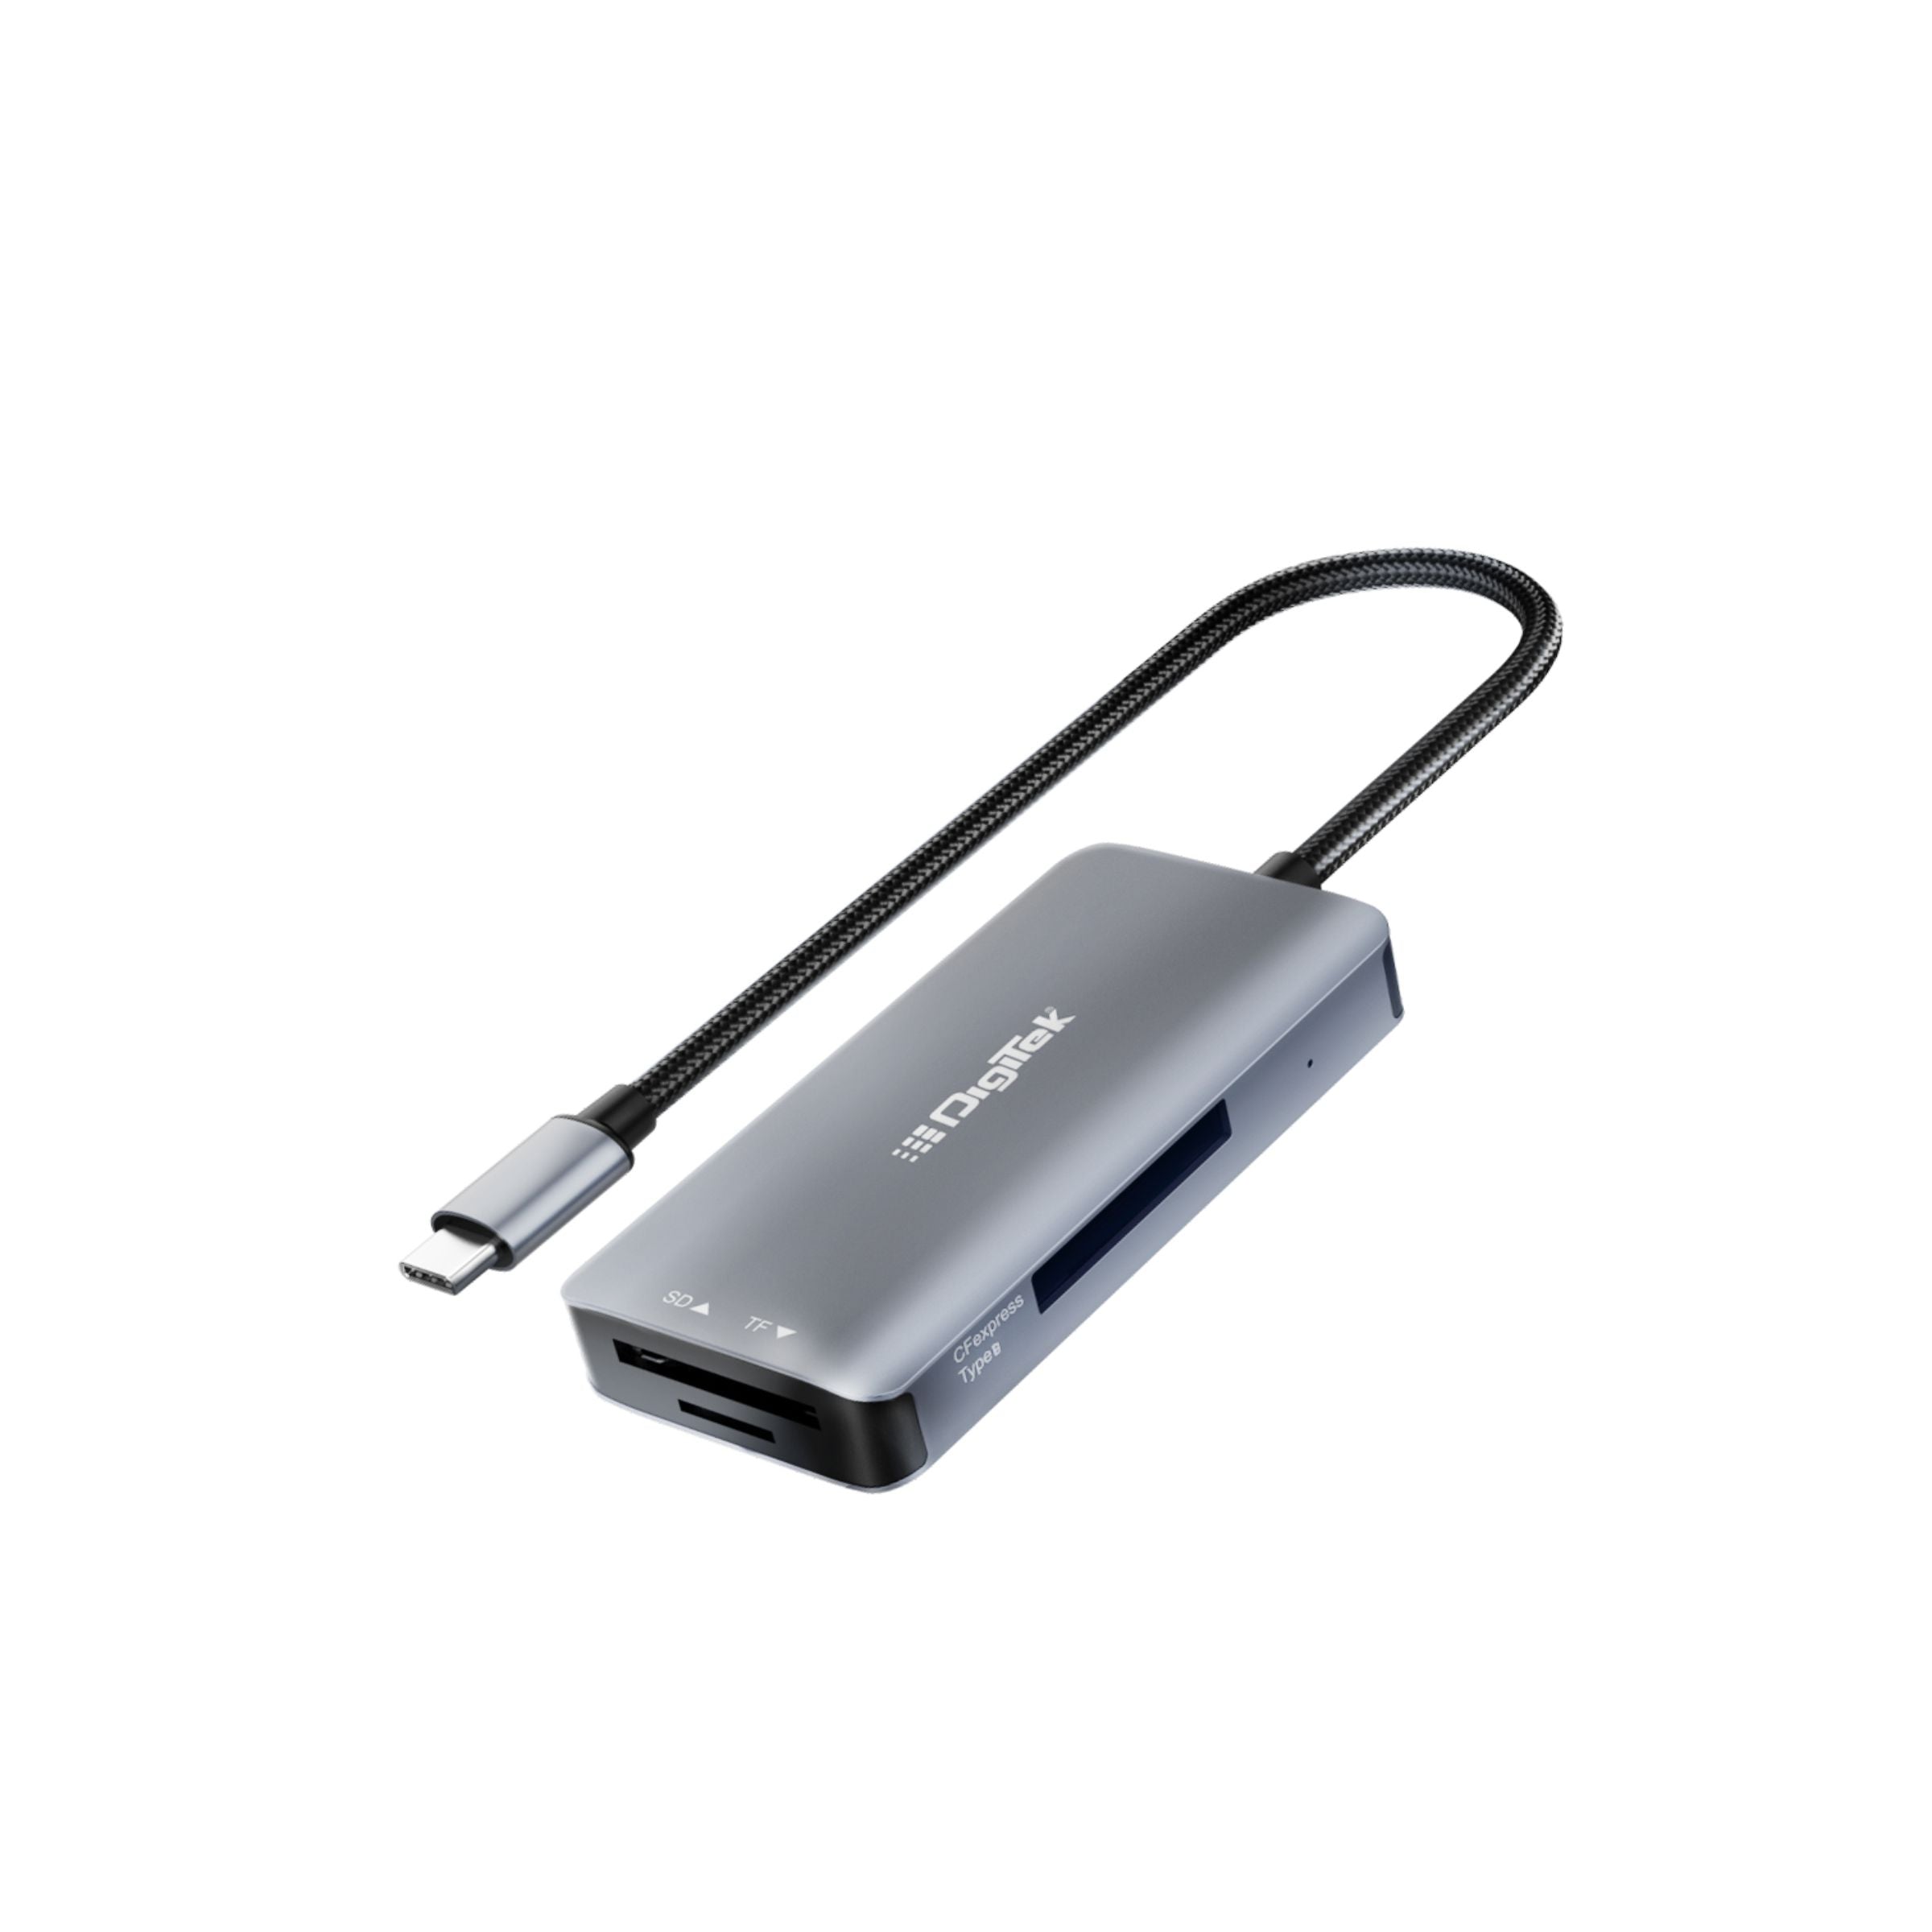 Digitek (DCR-104 CFB) 2 in 2 CF Express Type B & SDXC, USB 3.2 & 3.0 Card Reader, Support SD/SDHC/SDXC/UHS-I/UHS II Cards, Support Mac OS, iPad OS, Window, Android, Linux & Harmony